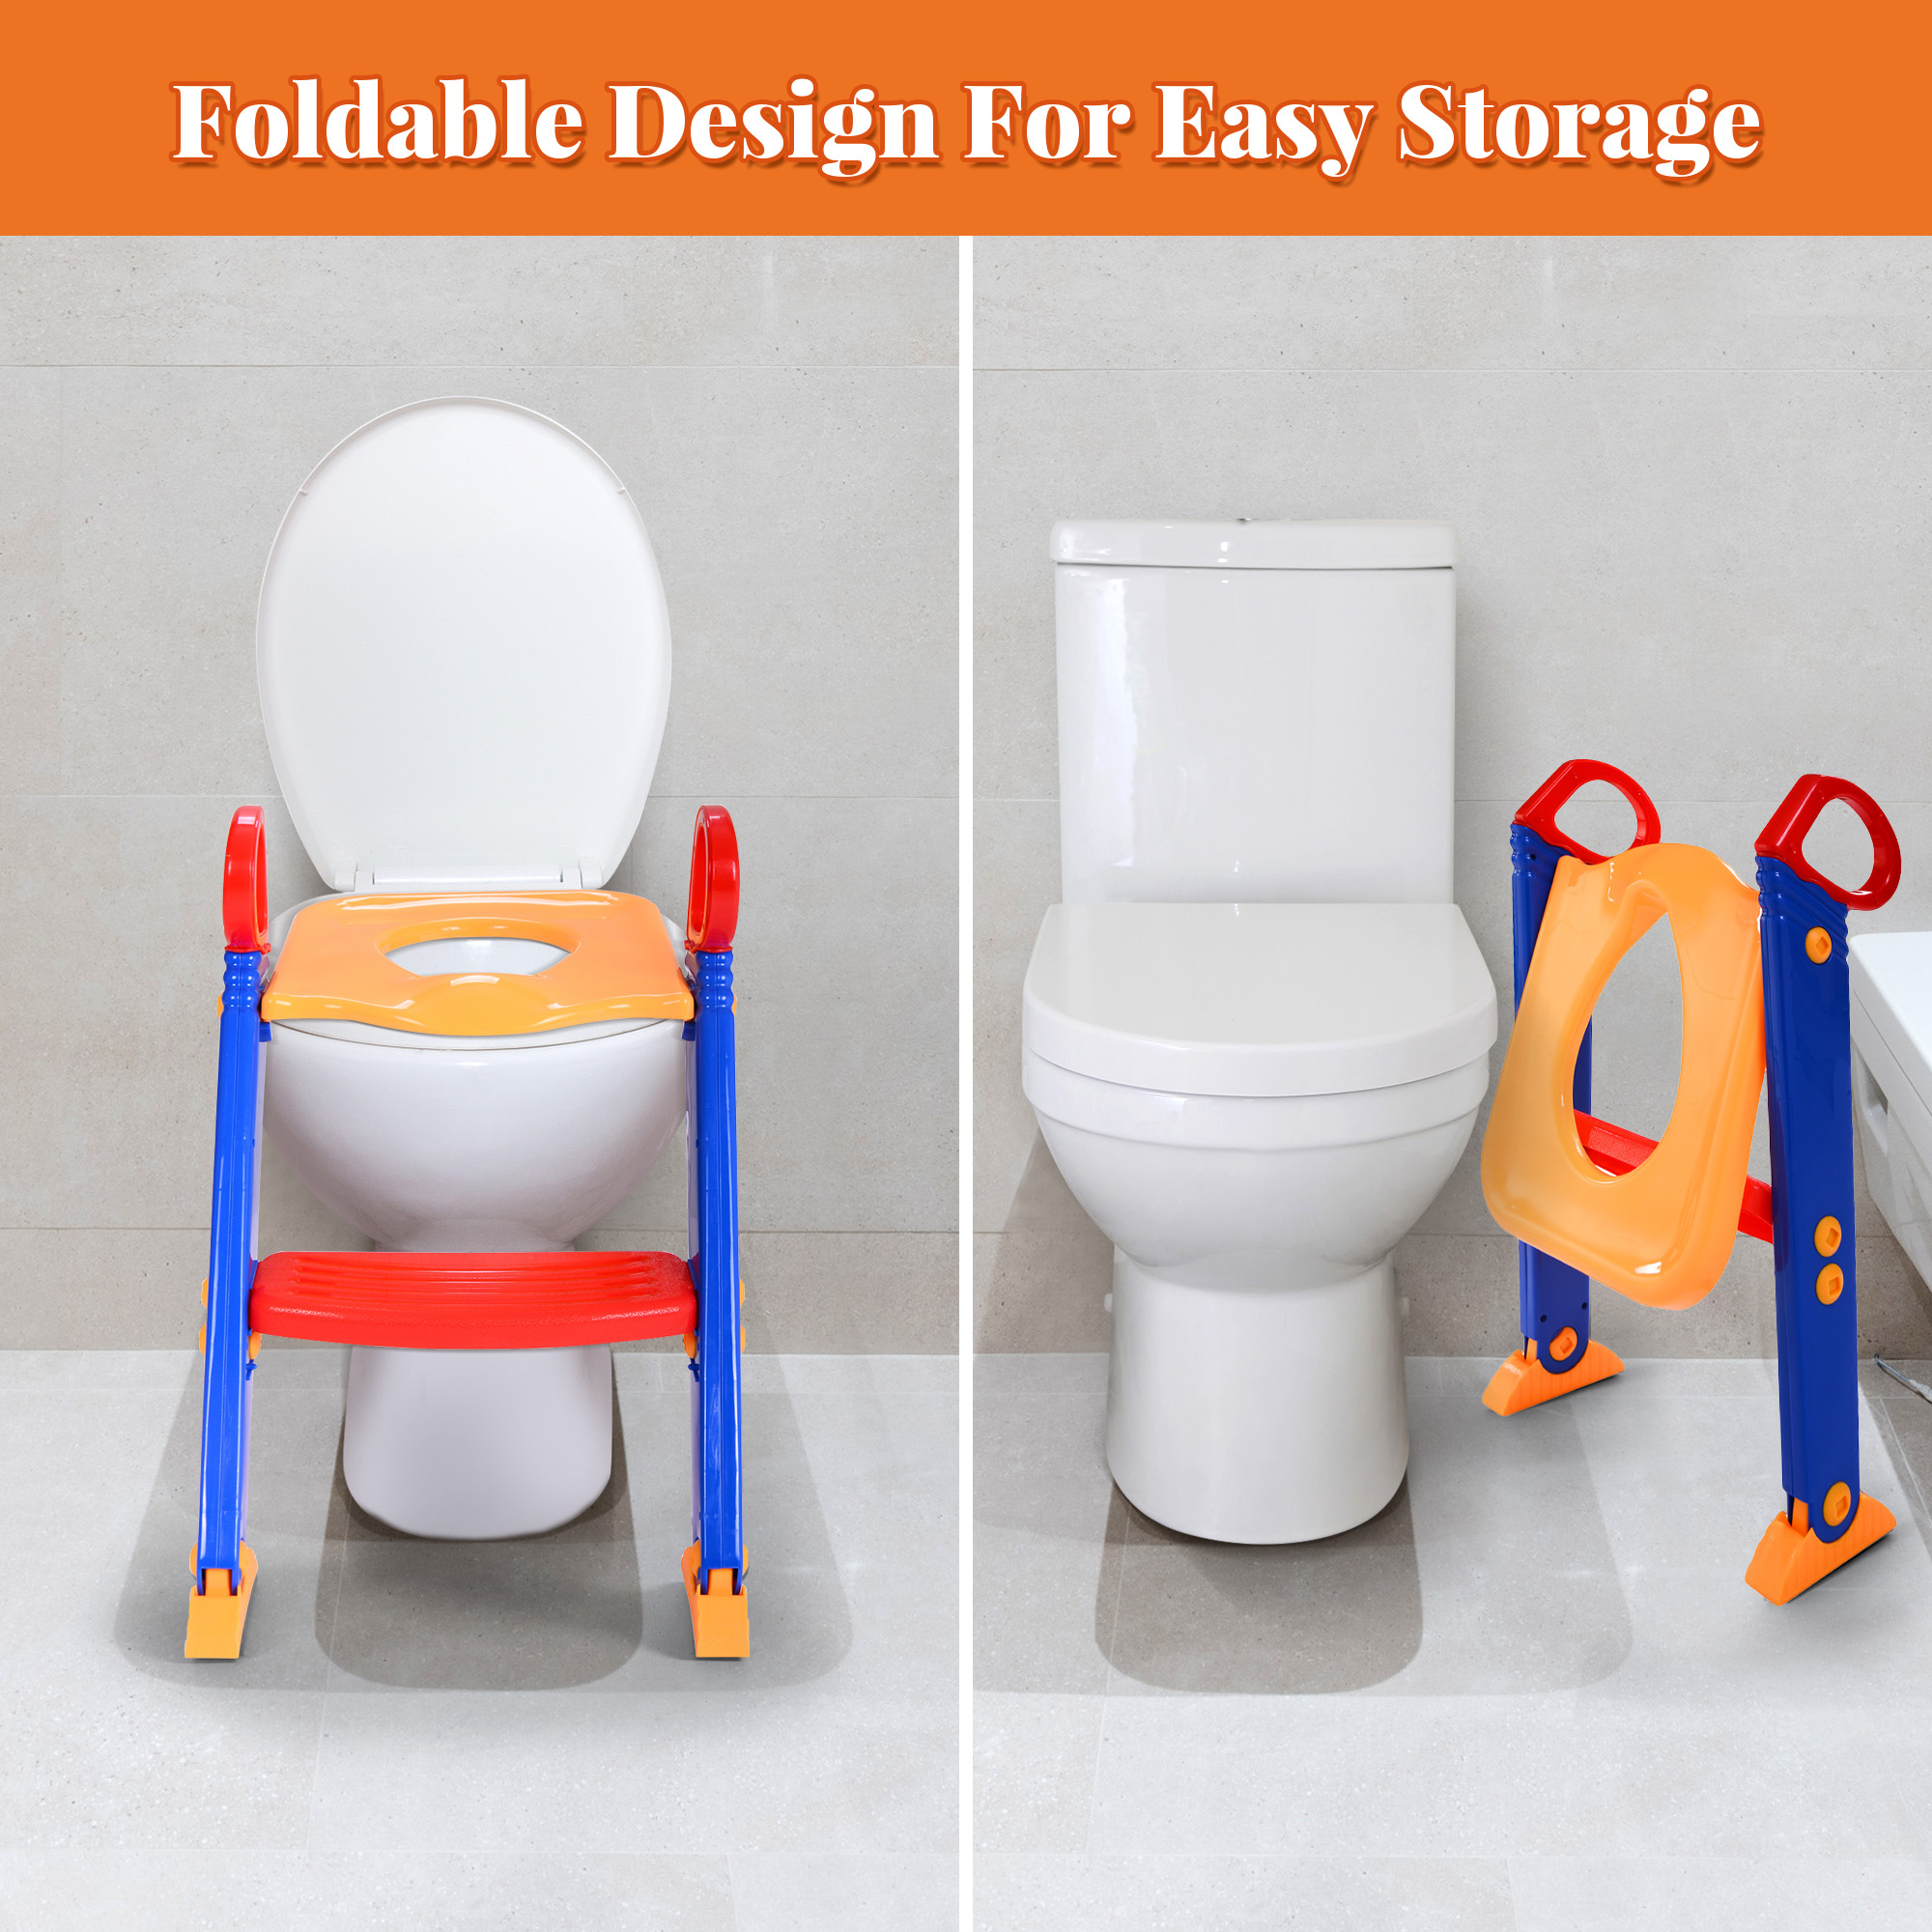 Tobbi Kids Training Potty Trainer Toilet Seat Chair Toddler With Ladder Step Up Stool - image 3 of 12